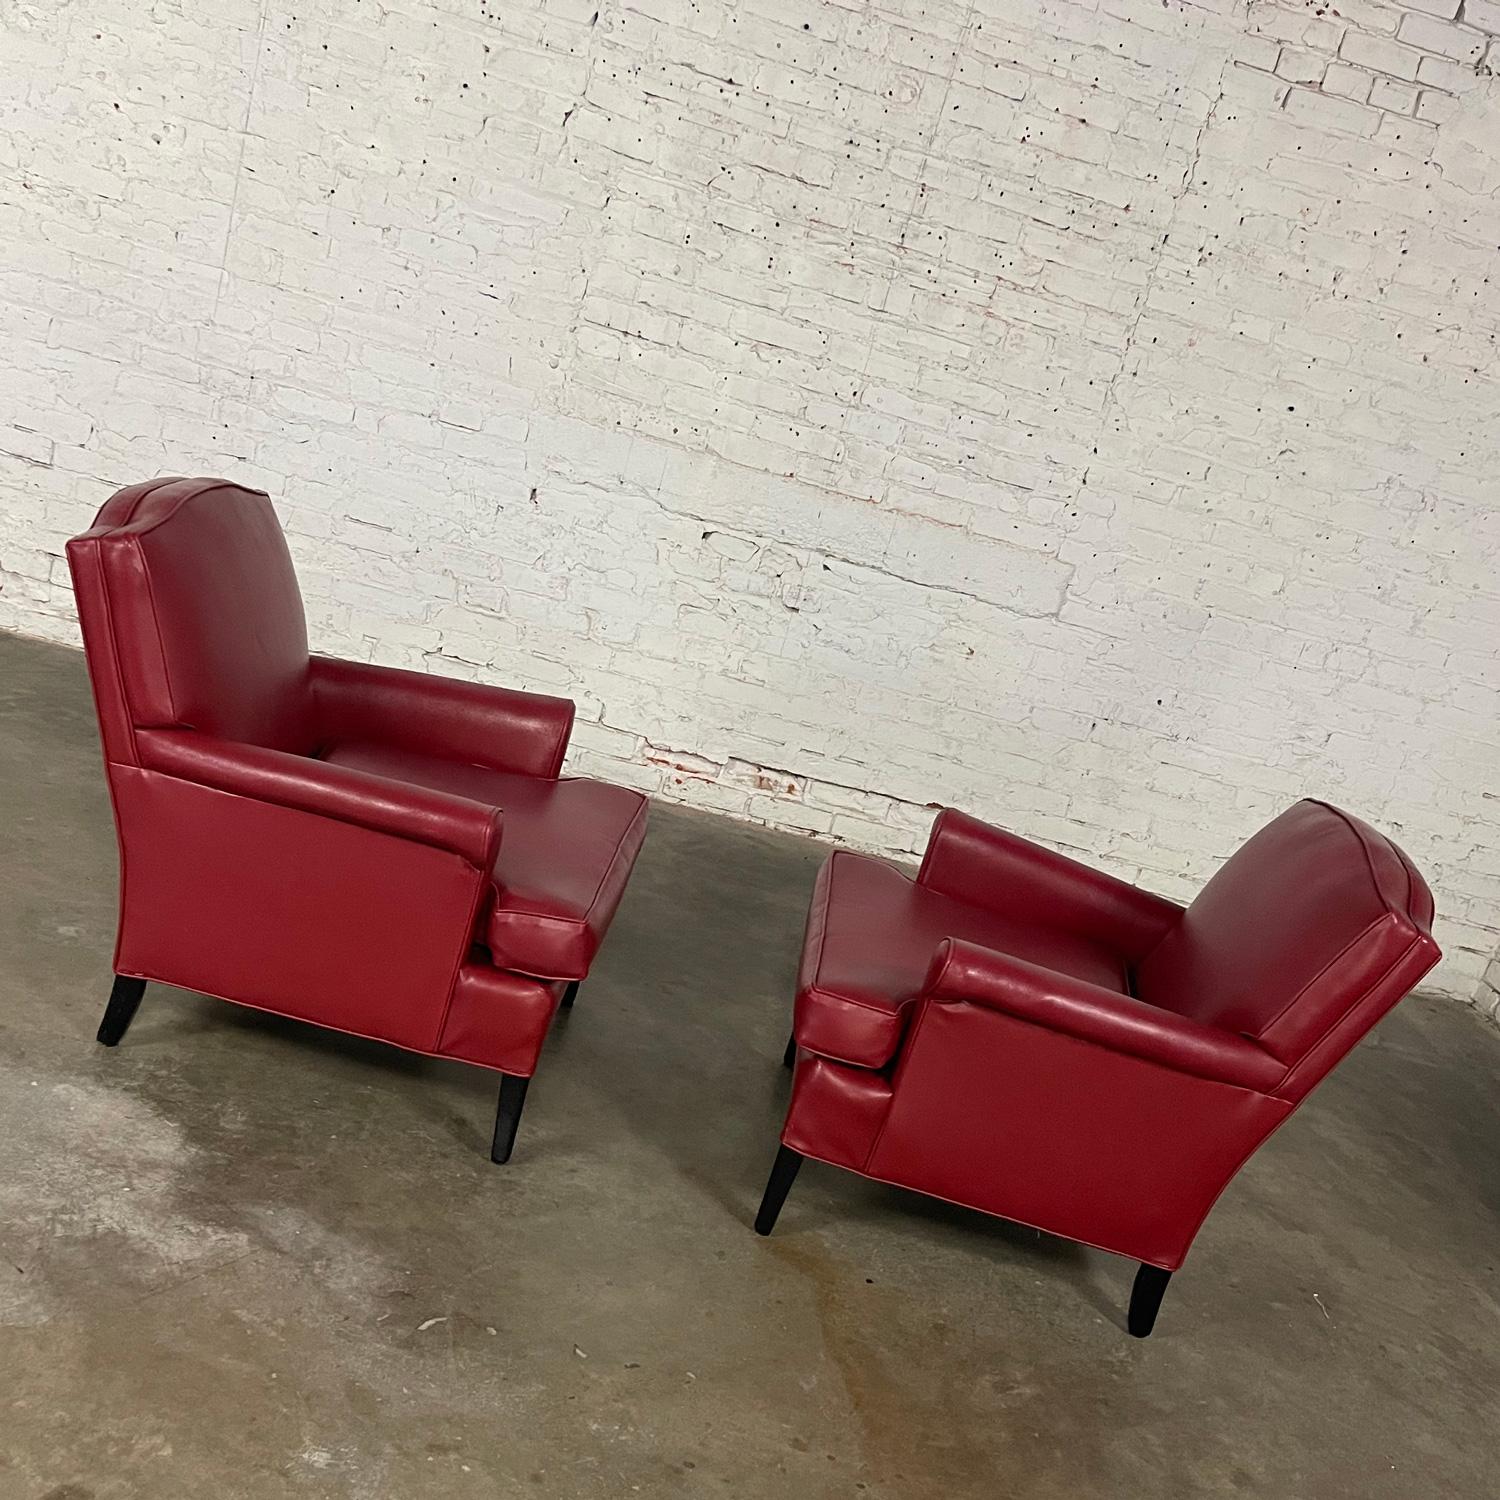 1940’s Traditional Club Chairs Original Red Faux Leather & Wood Legs a Pair For Sale 7